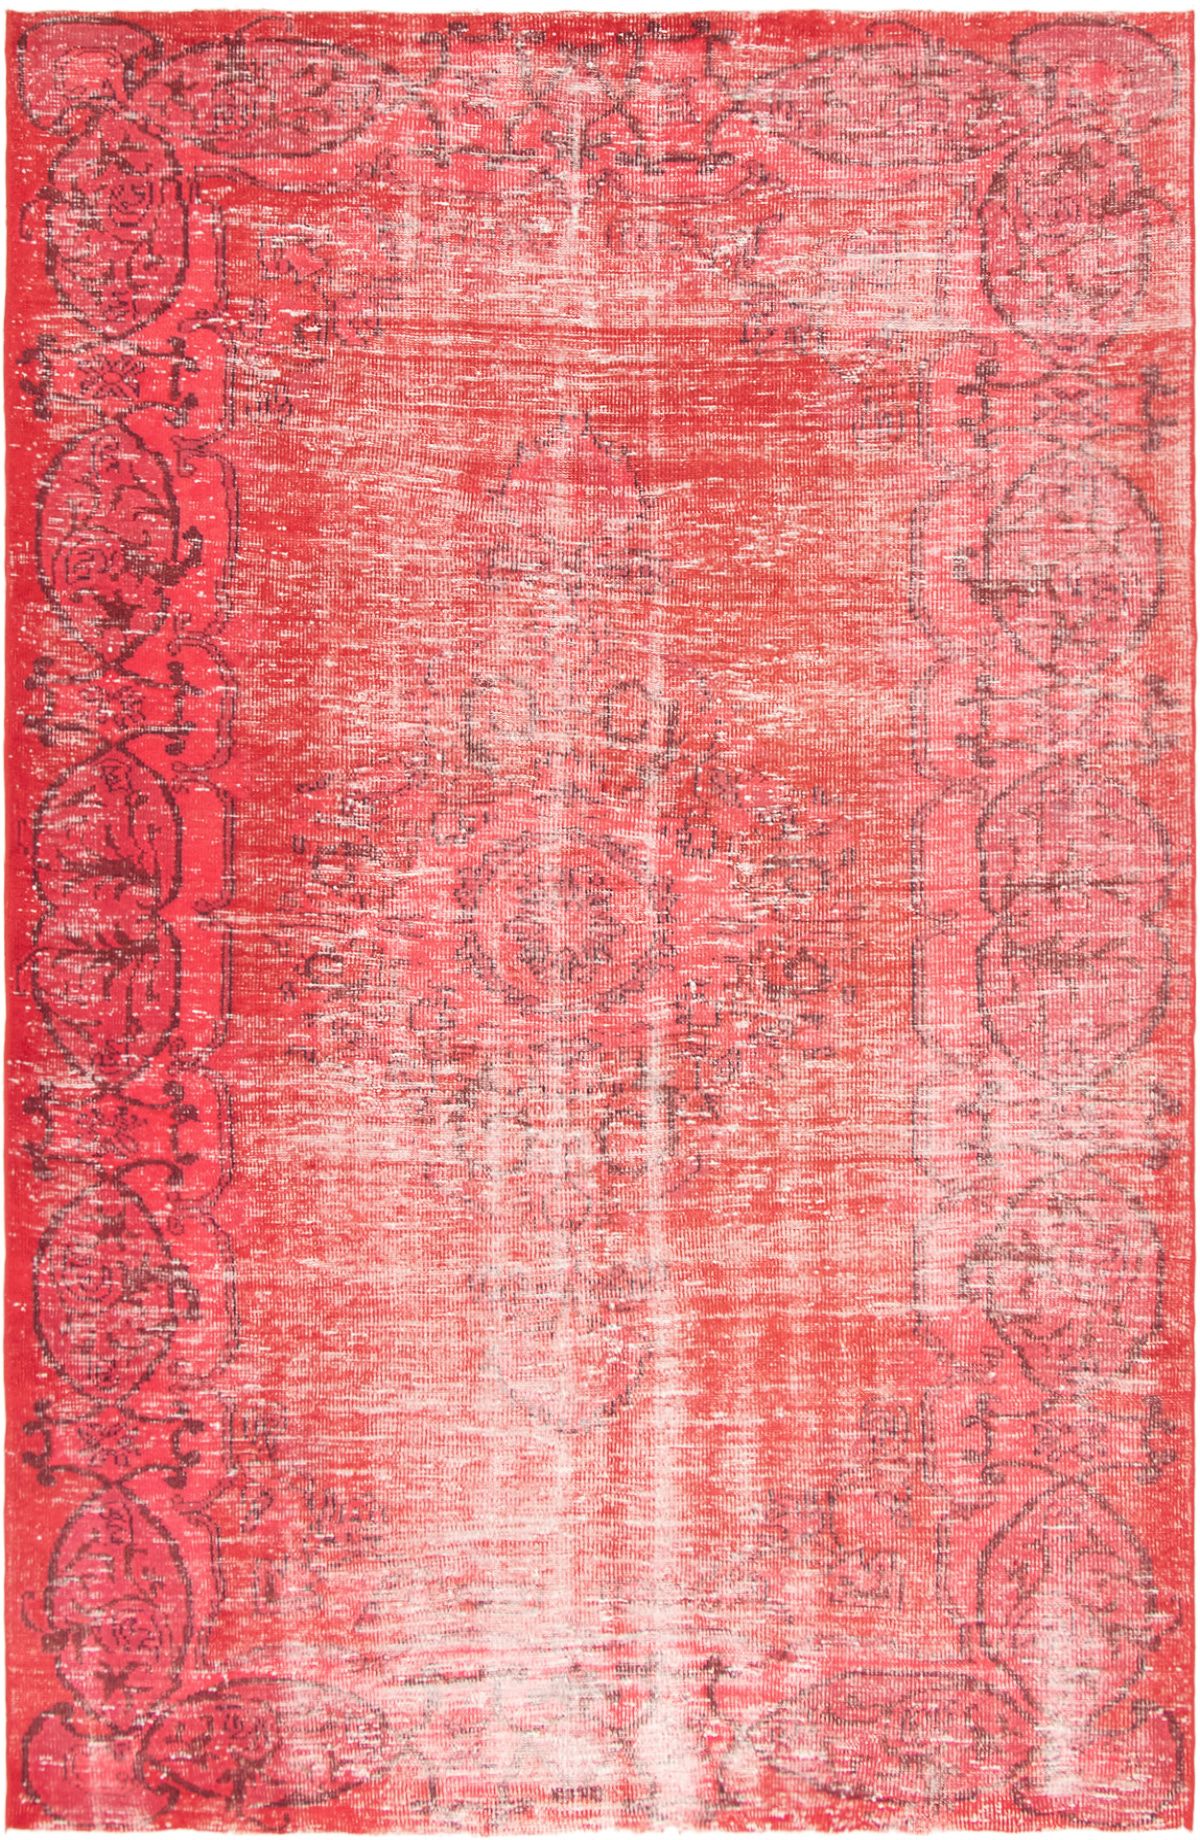 Hand-knotted Color Transition Red Wool Rug 6'9" x 10'6" Size: 6'9" x 10'6"  